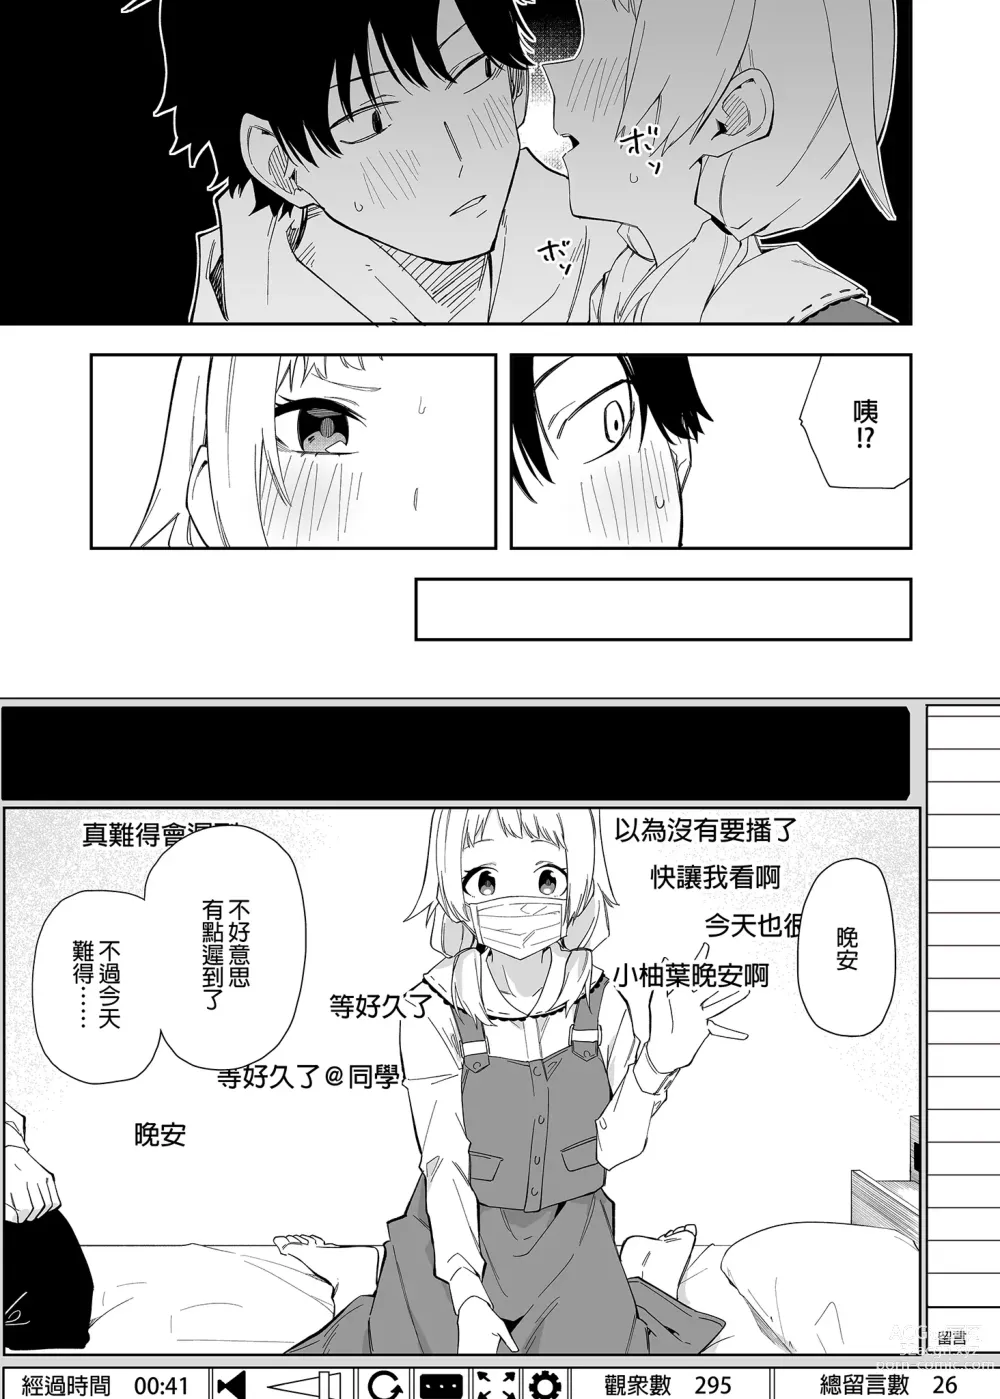 Page 13 of doujinshi 隣人は有名配信者